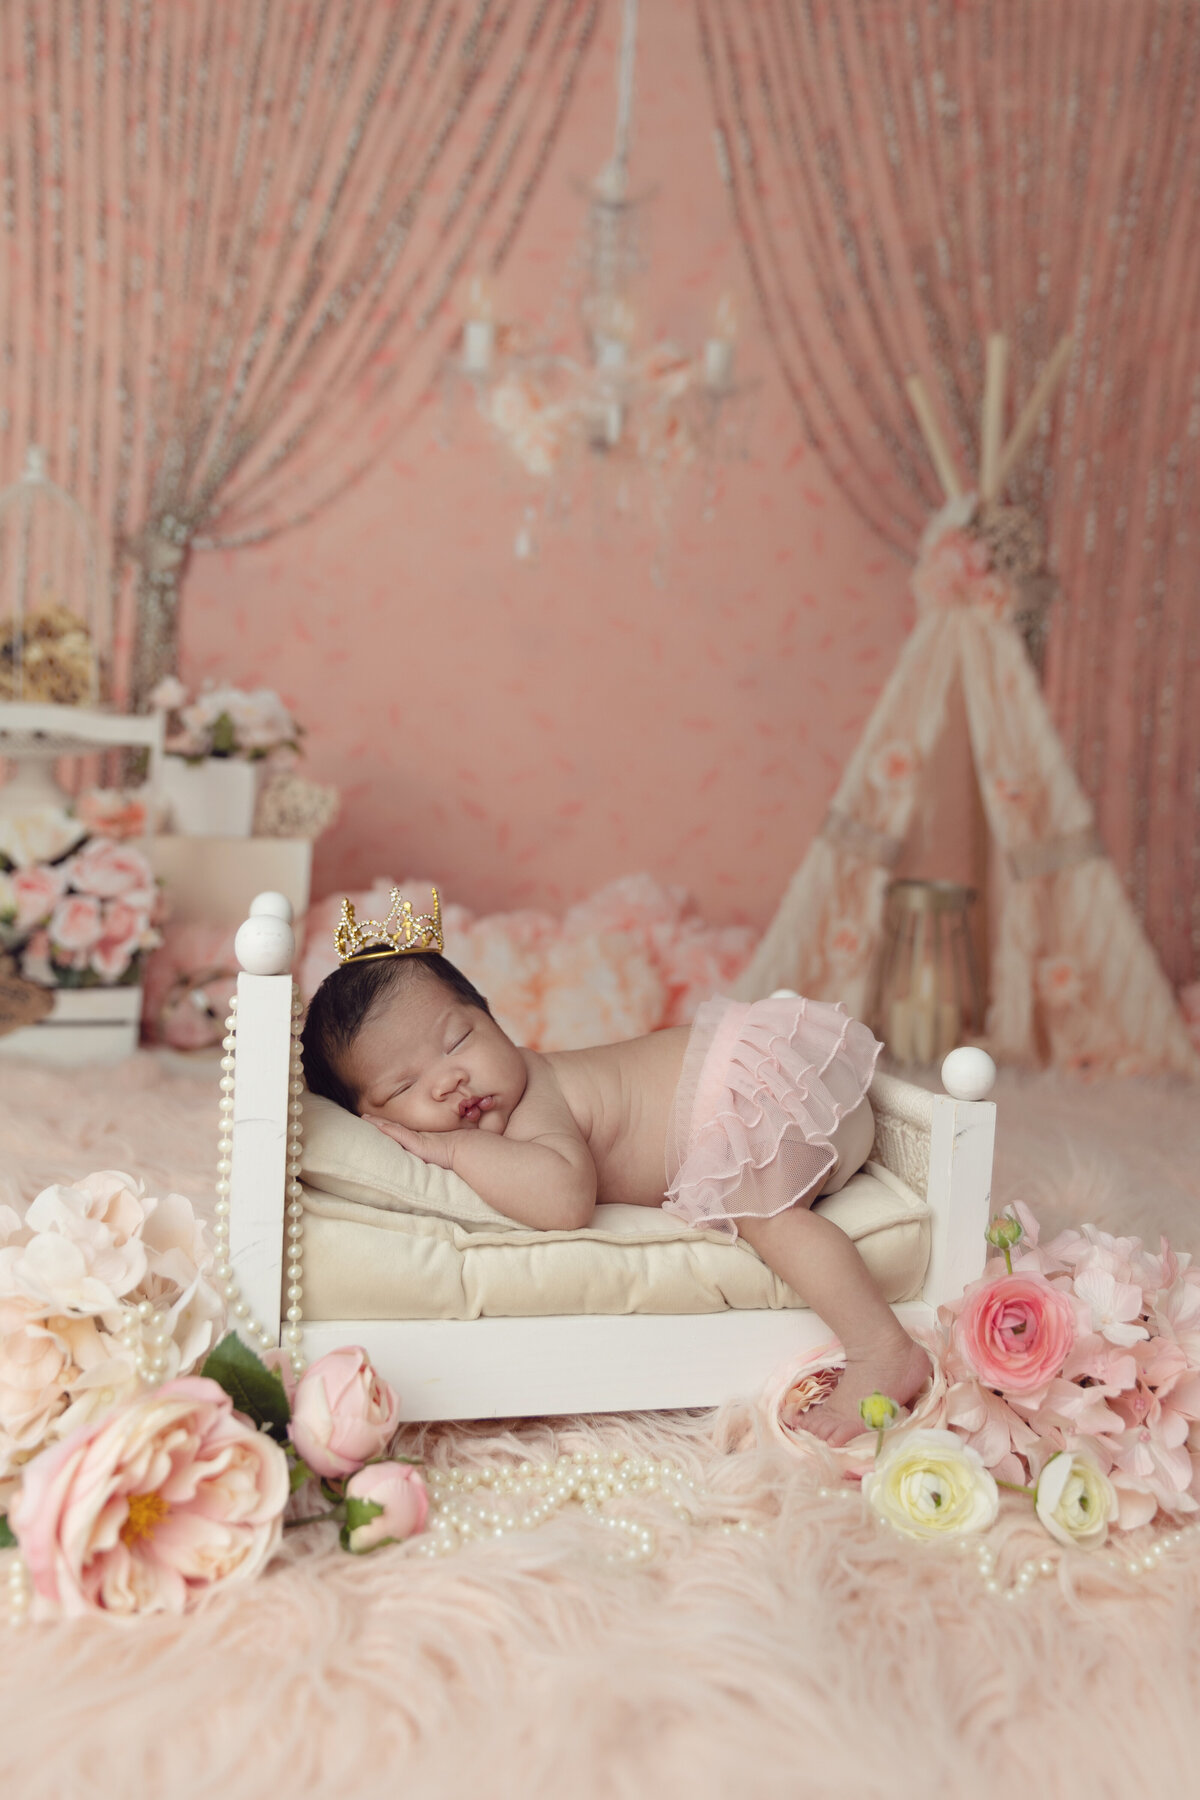 A sleeping newborn baby girl lays on her hands in a tiny white bed in a pink tutu